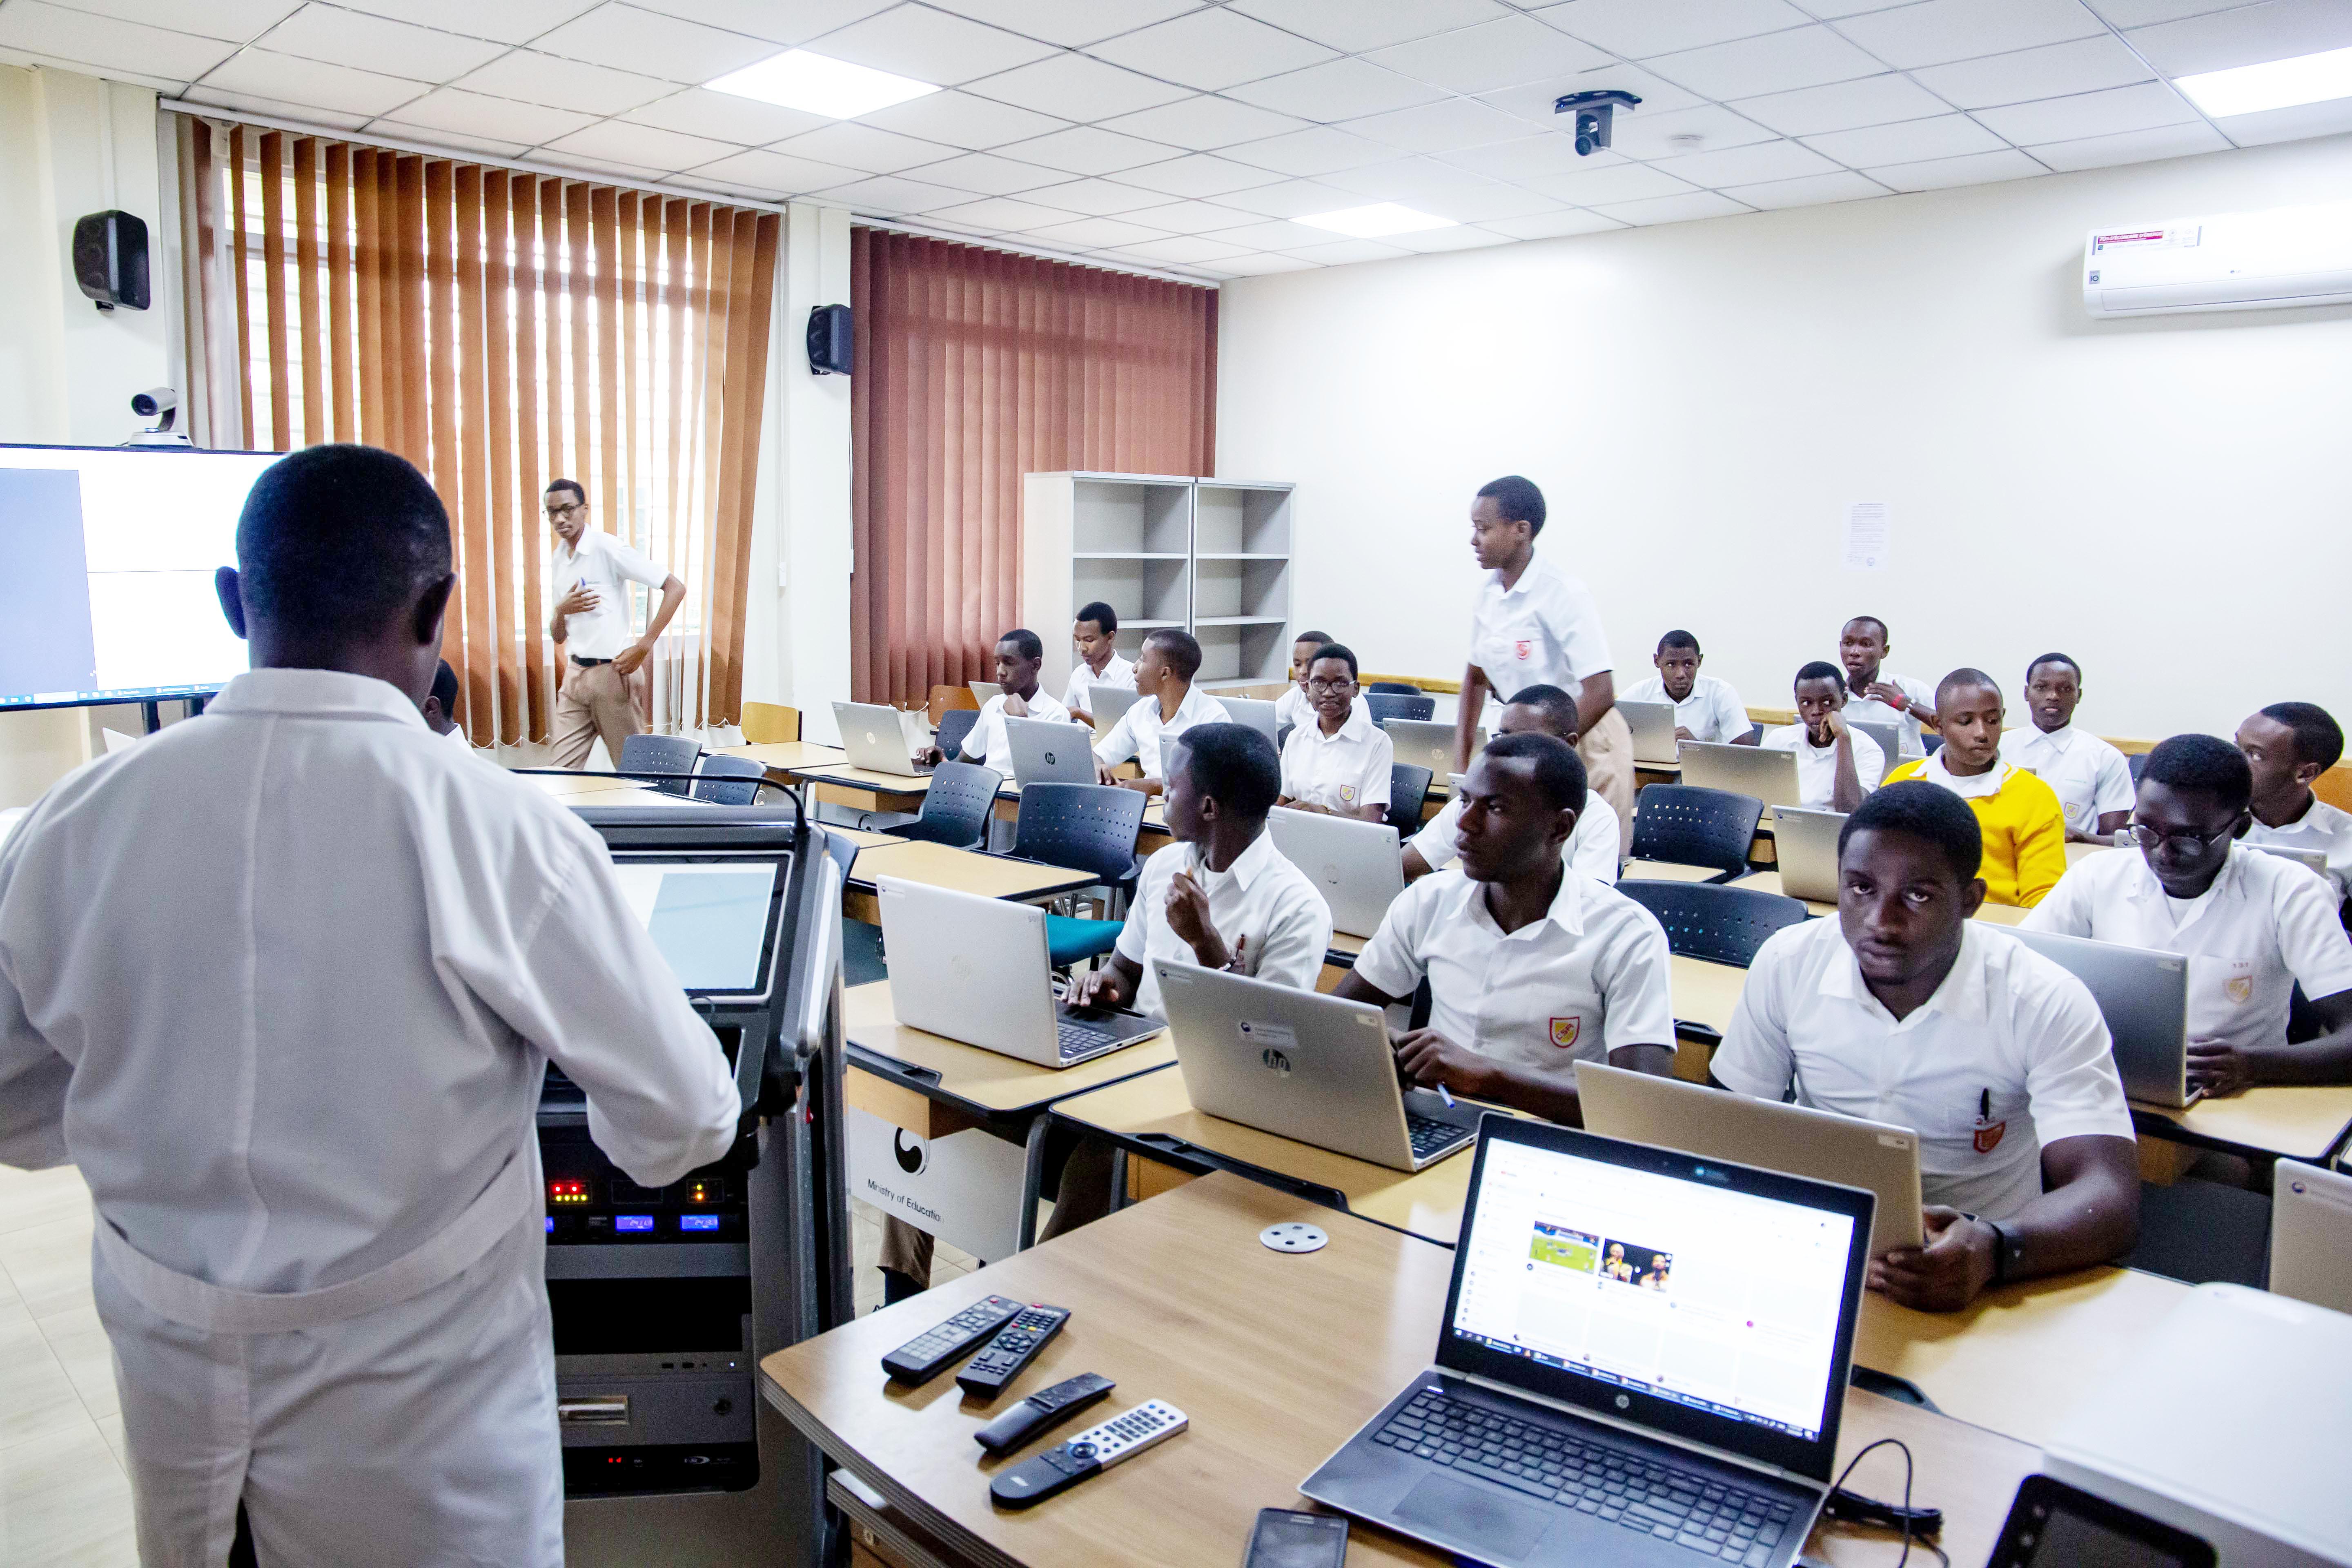 Students during an IT class at College St Andre in Kigali. Photo: Dan Nsengiyumva.